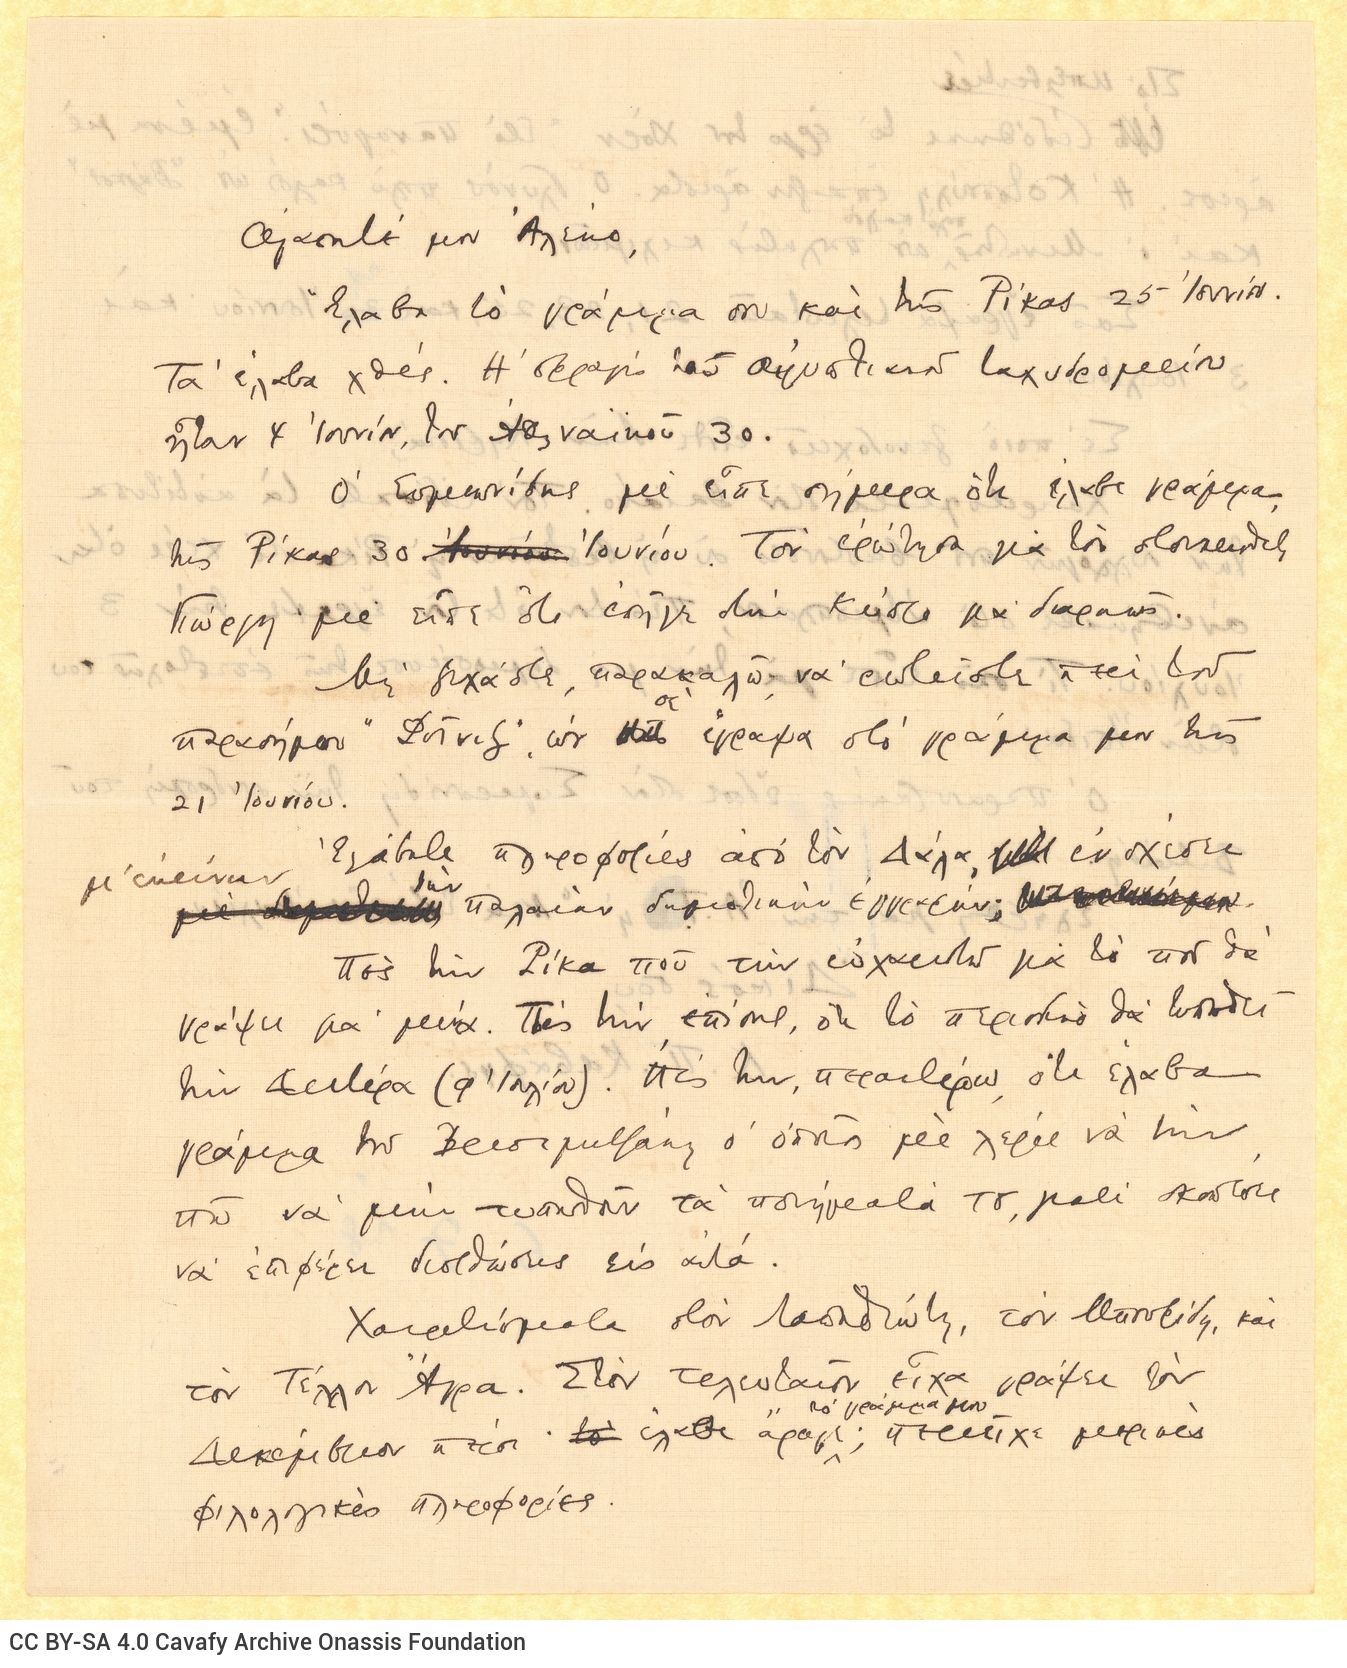 Handwritten draft letter by Cavafy to Alekos [Singopoulo] on both sides of a sheet. The poet informs him about the correspond